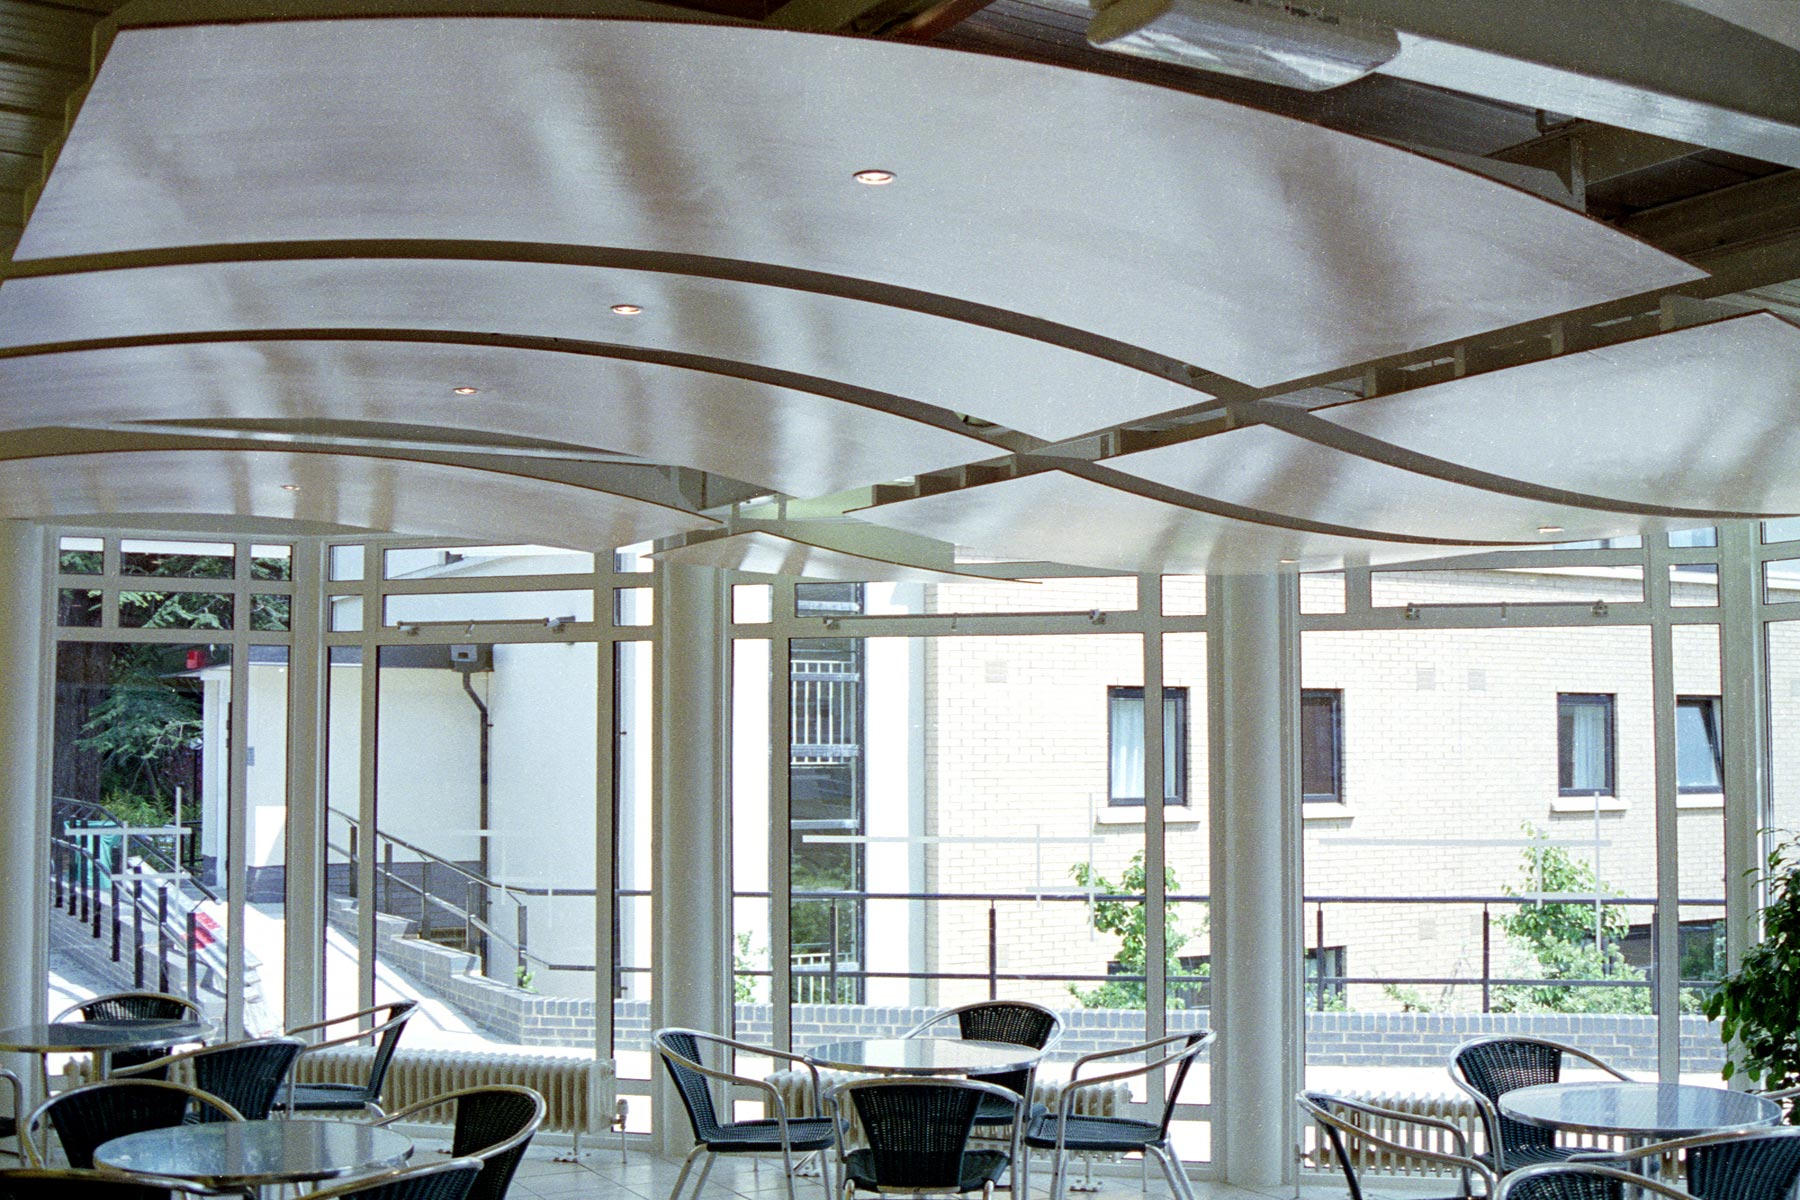 Royal Holloway University of London - Student Bar Extension - Curved ceiling acoustic panels